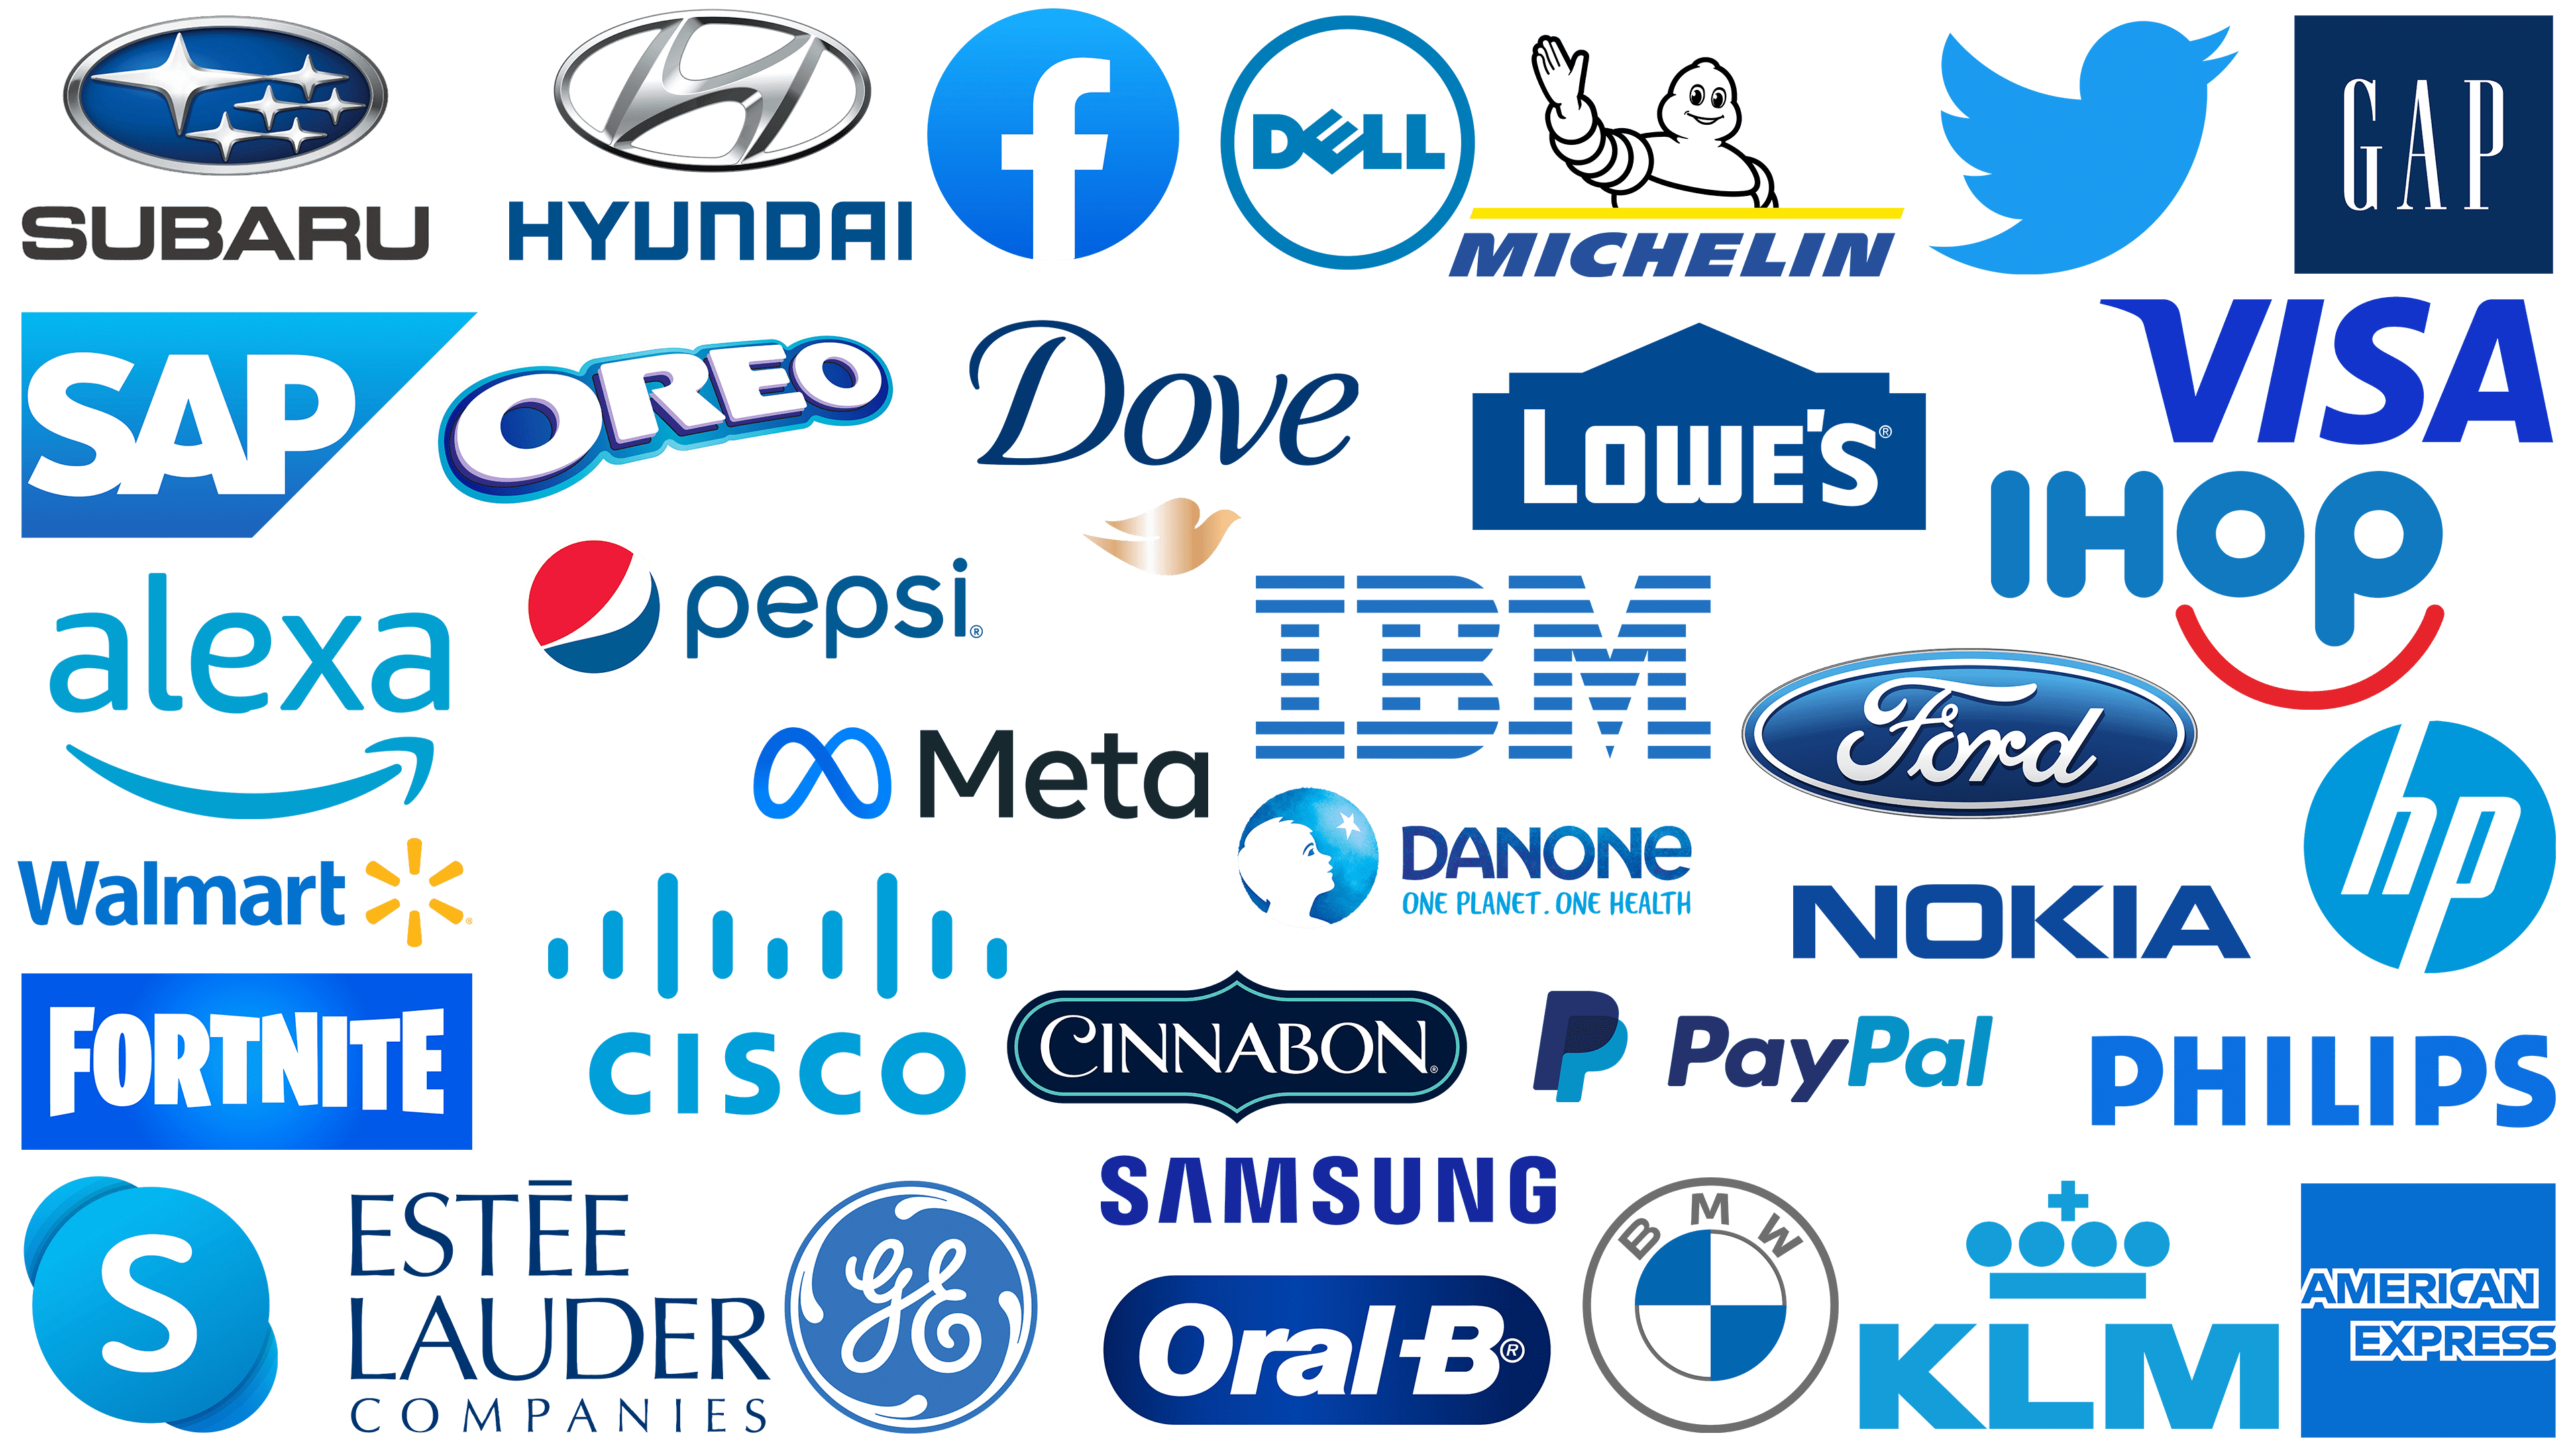 Famous Blue Logos: Well-Known Companies With Blue Logos